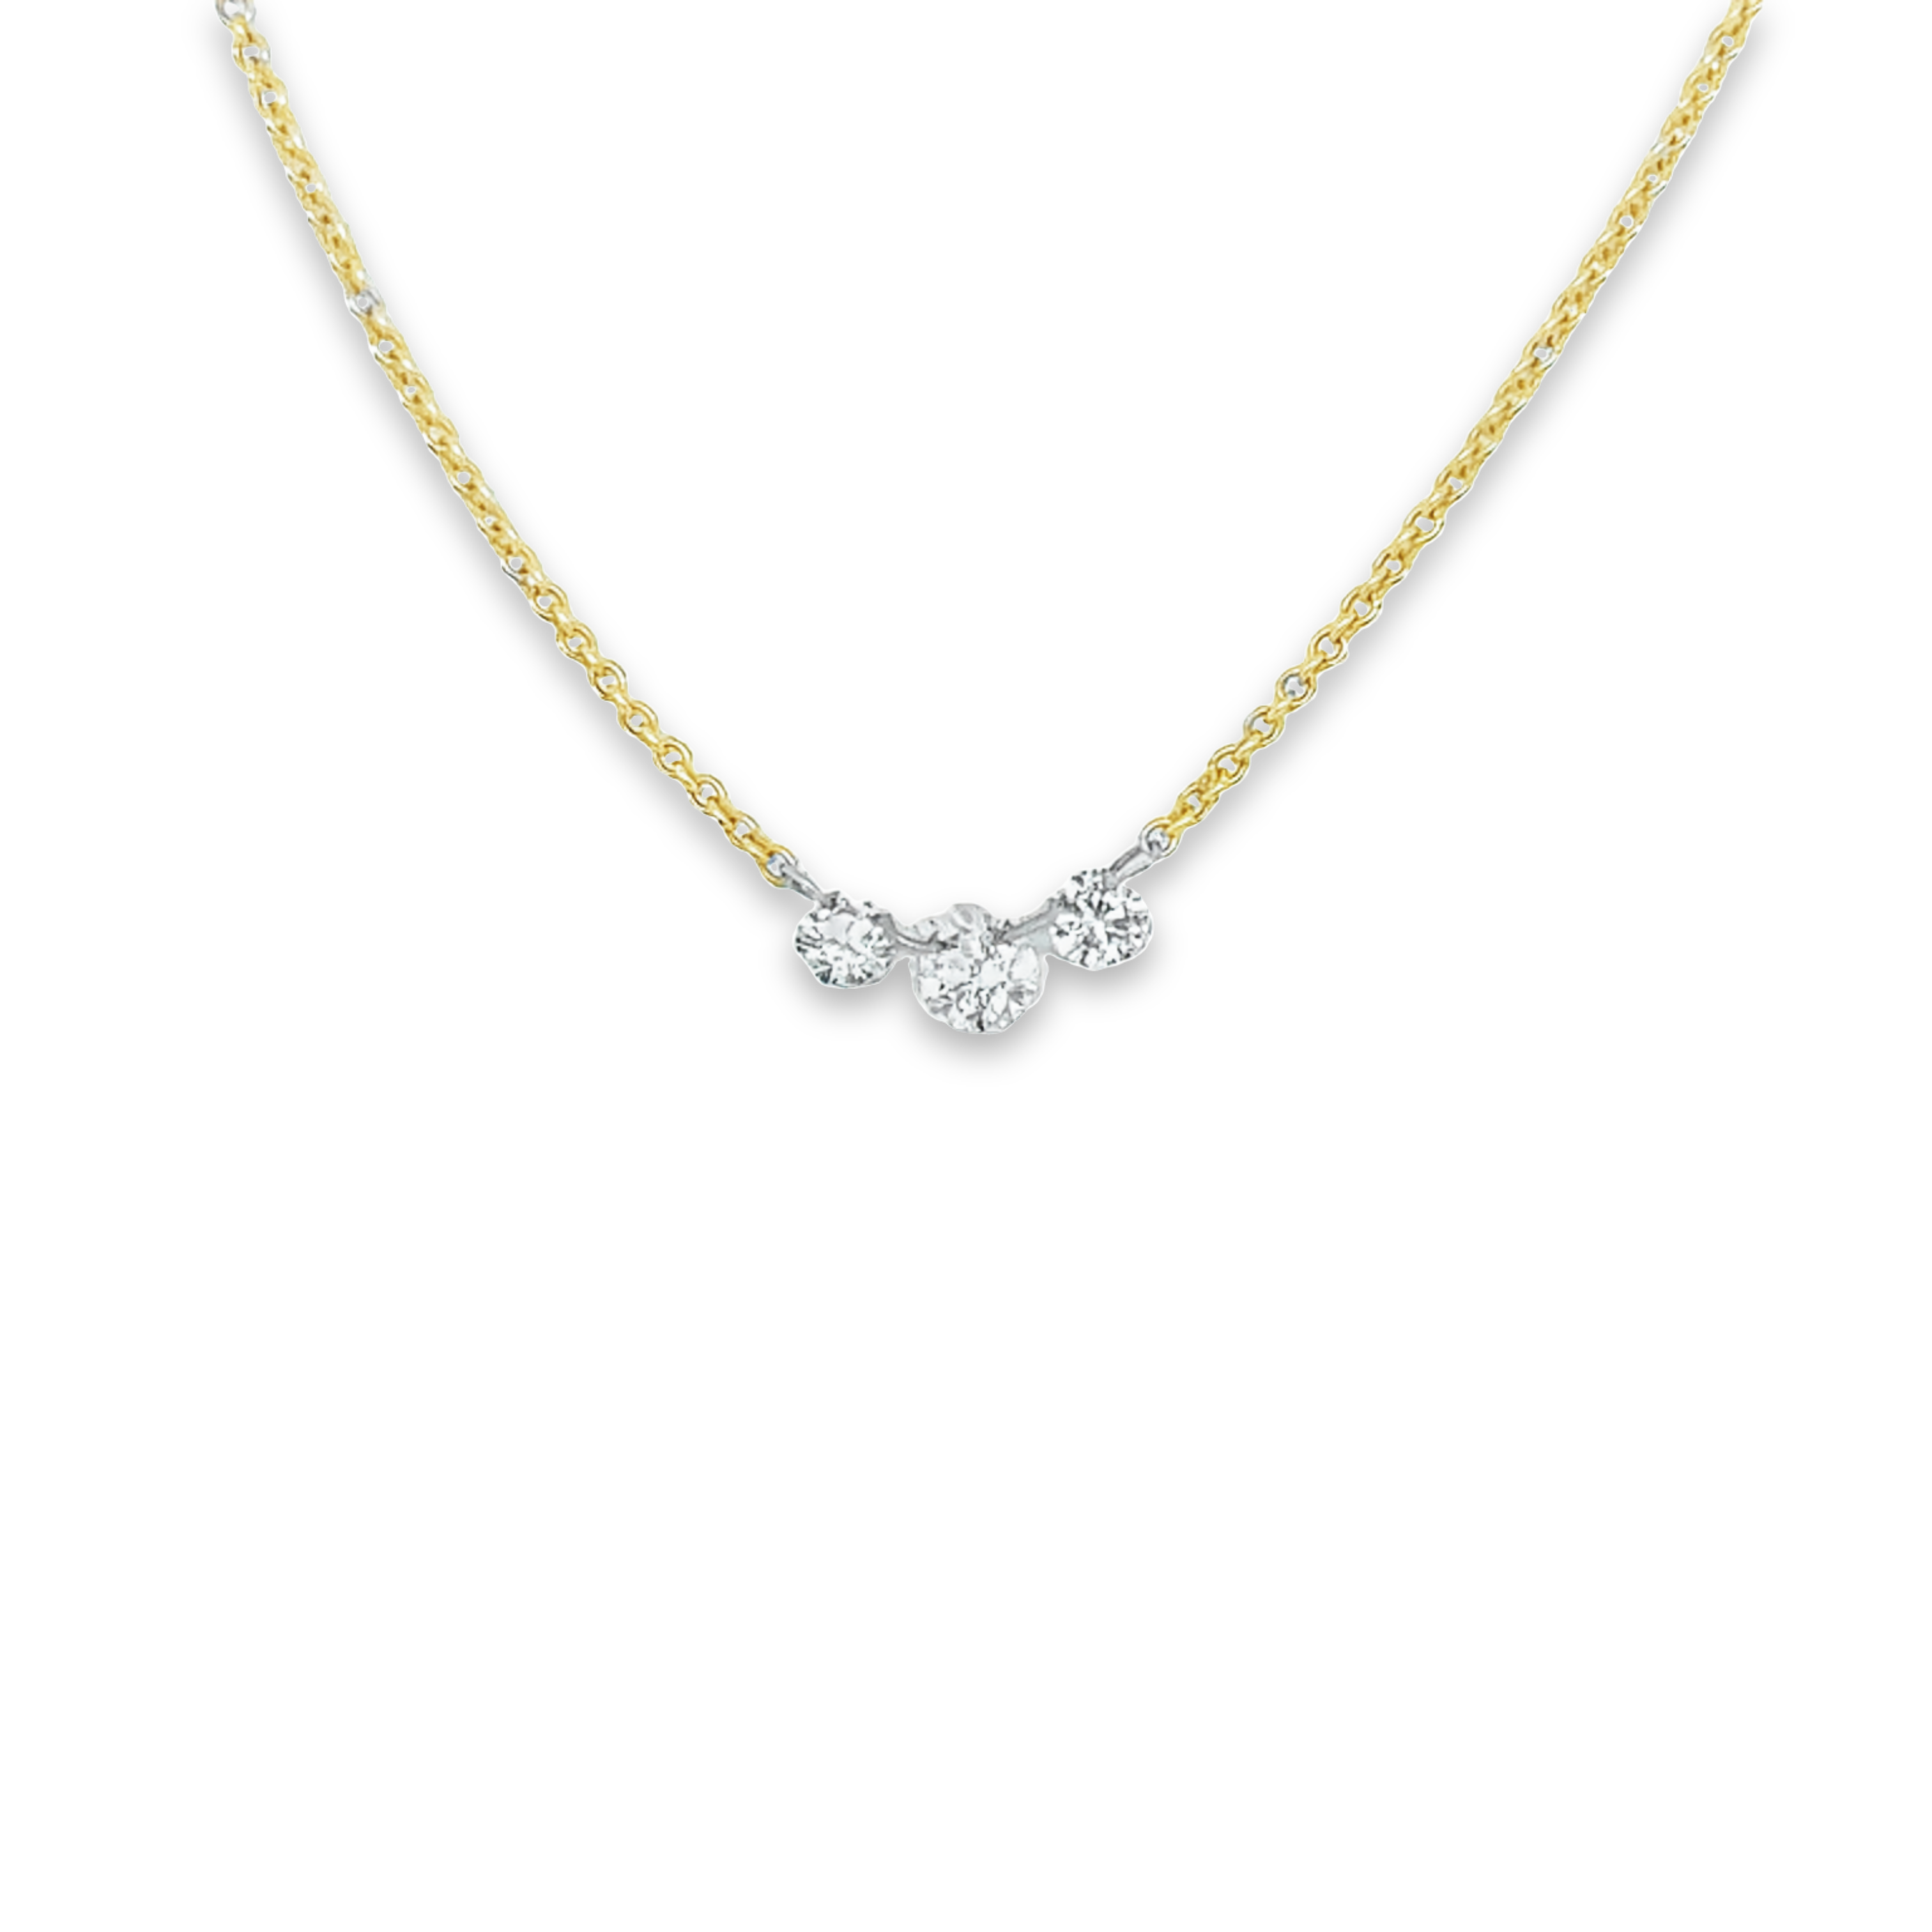 Featured image for “3 Diamond Infinity Necklace”